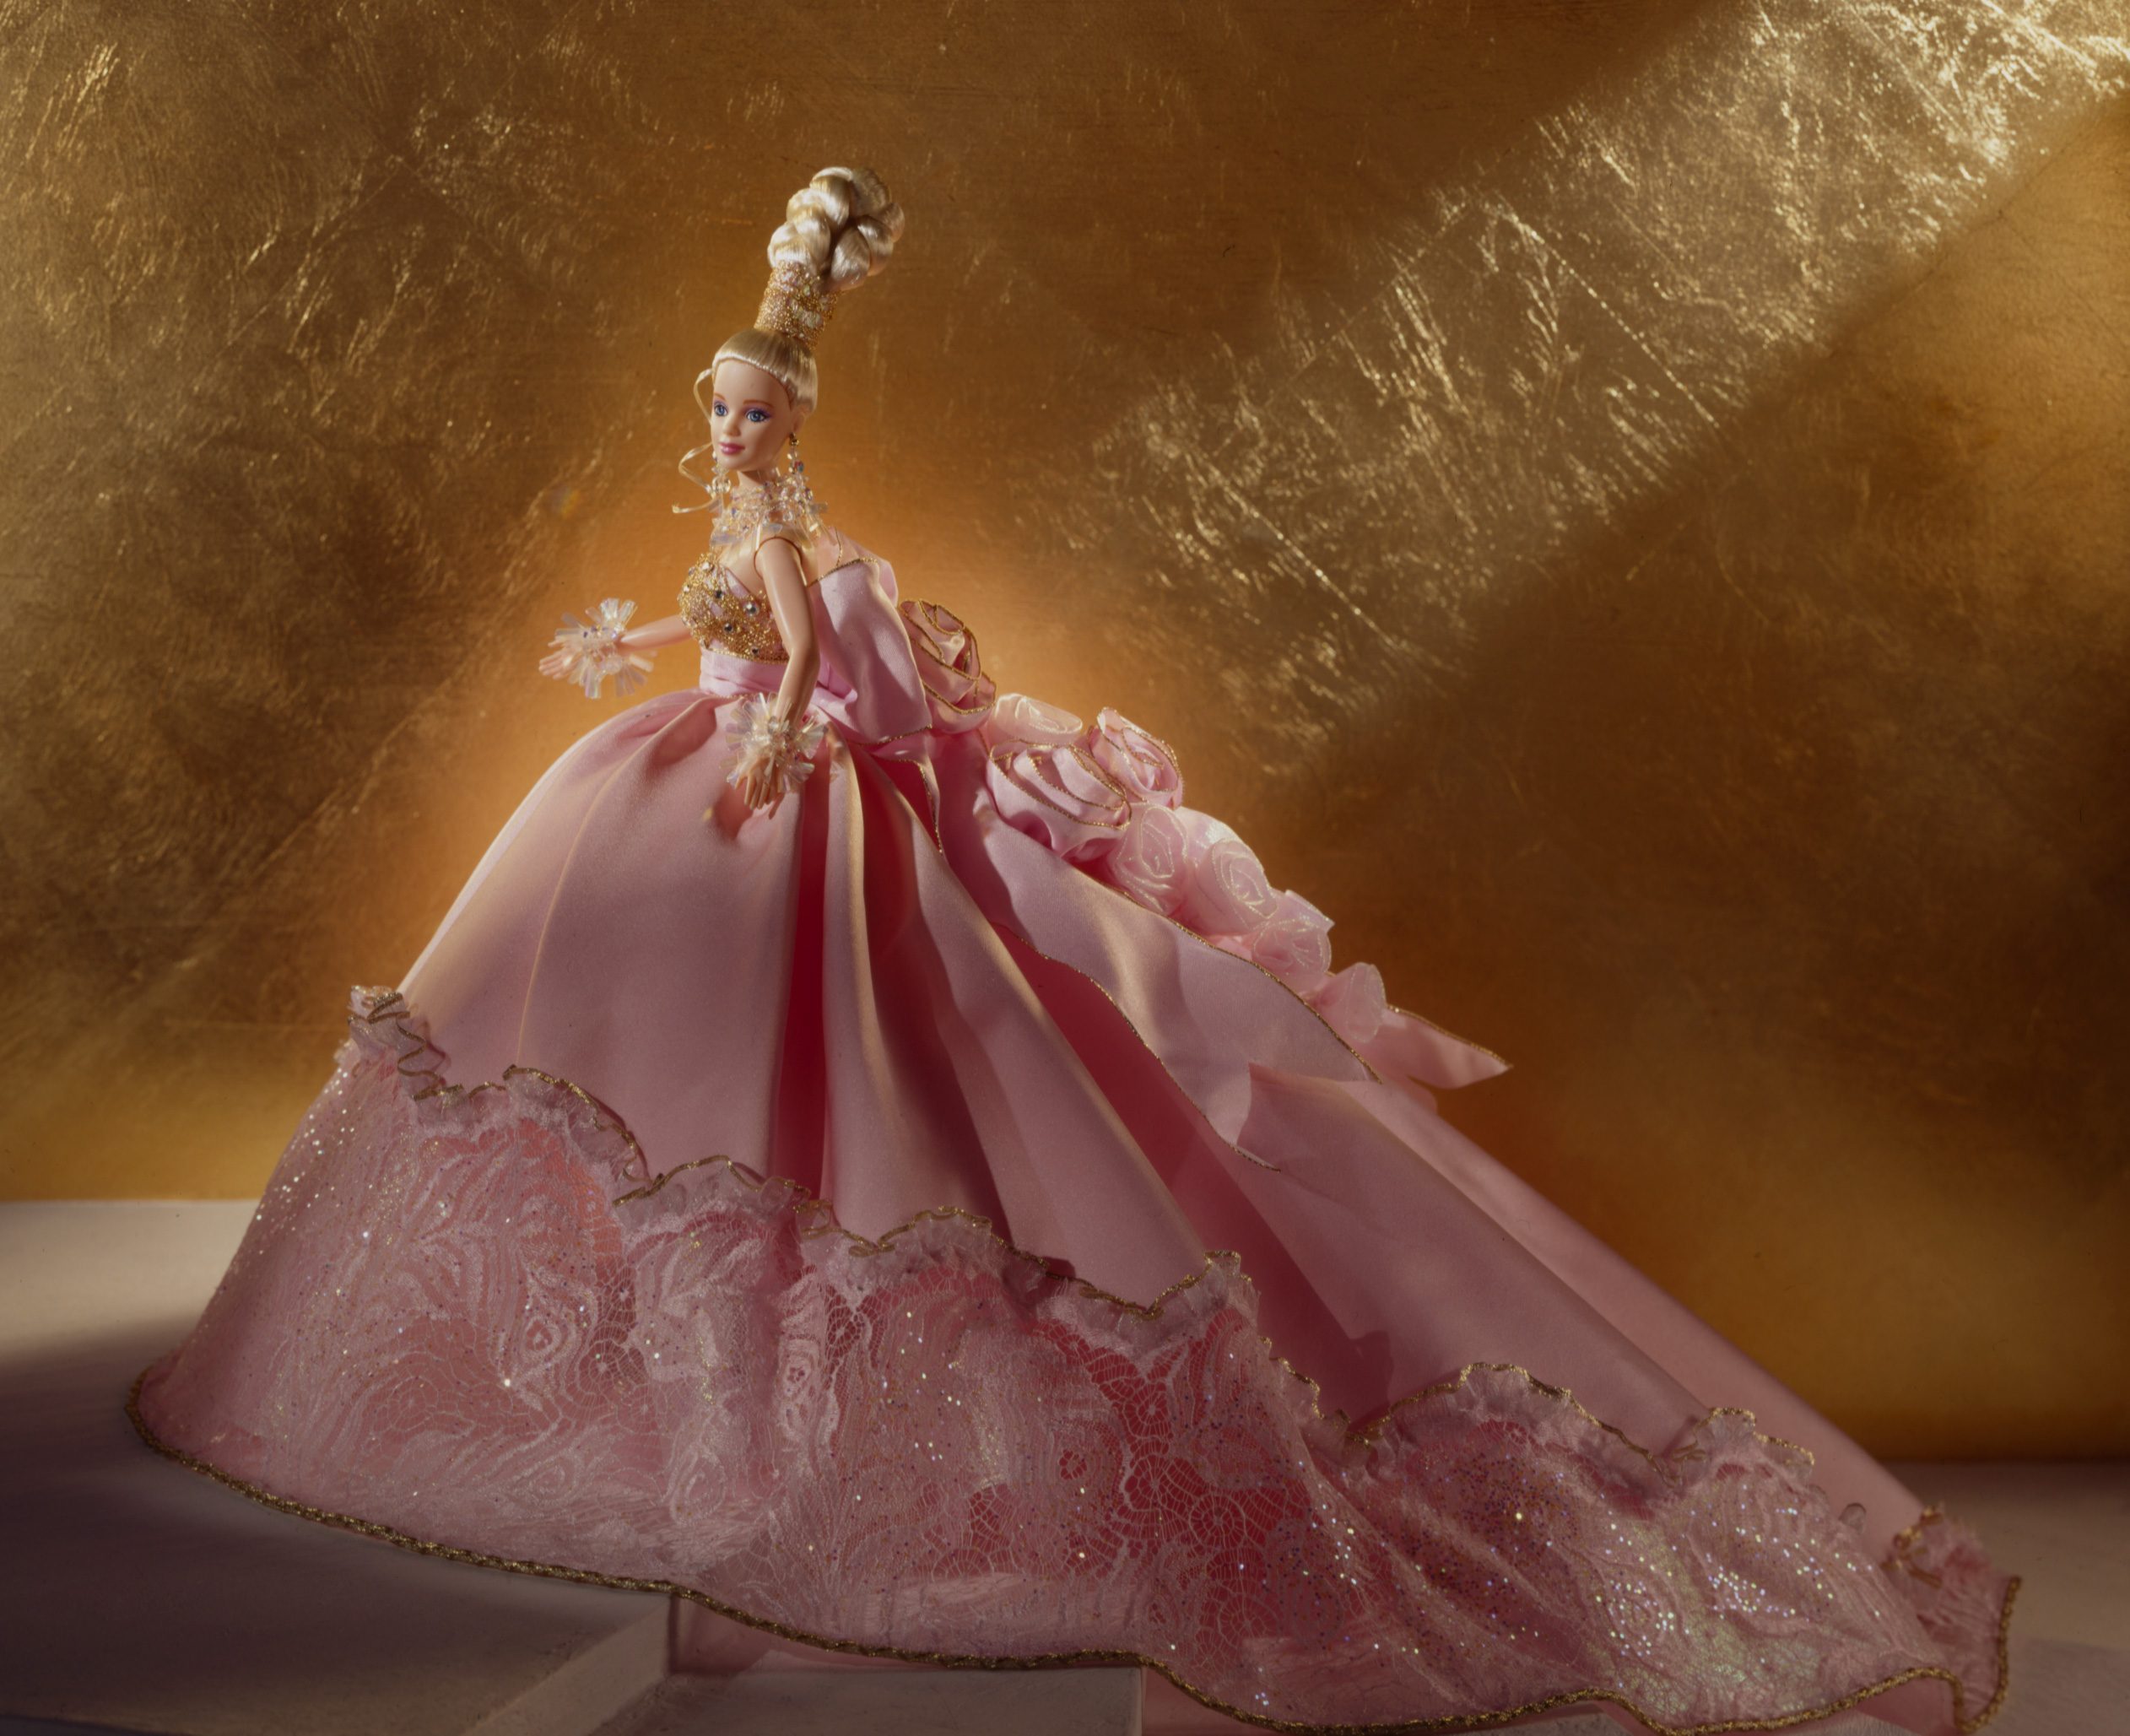 These Rare Barbie Dolls Could Fetch a Lot of Money | Reader's Digest